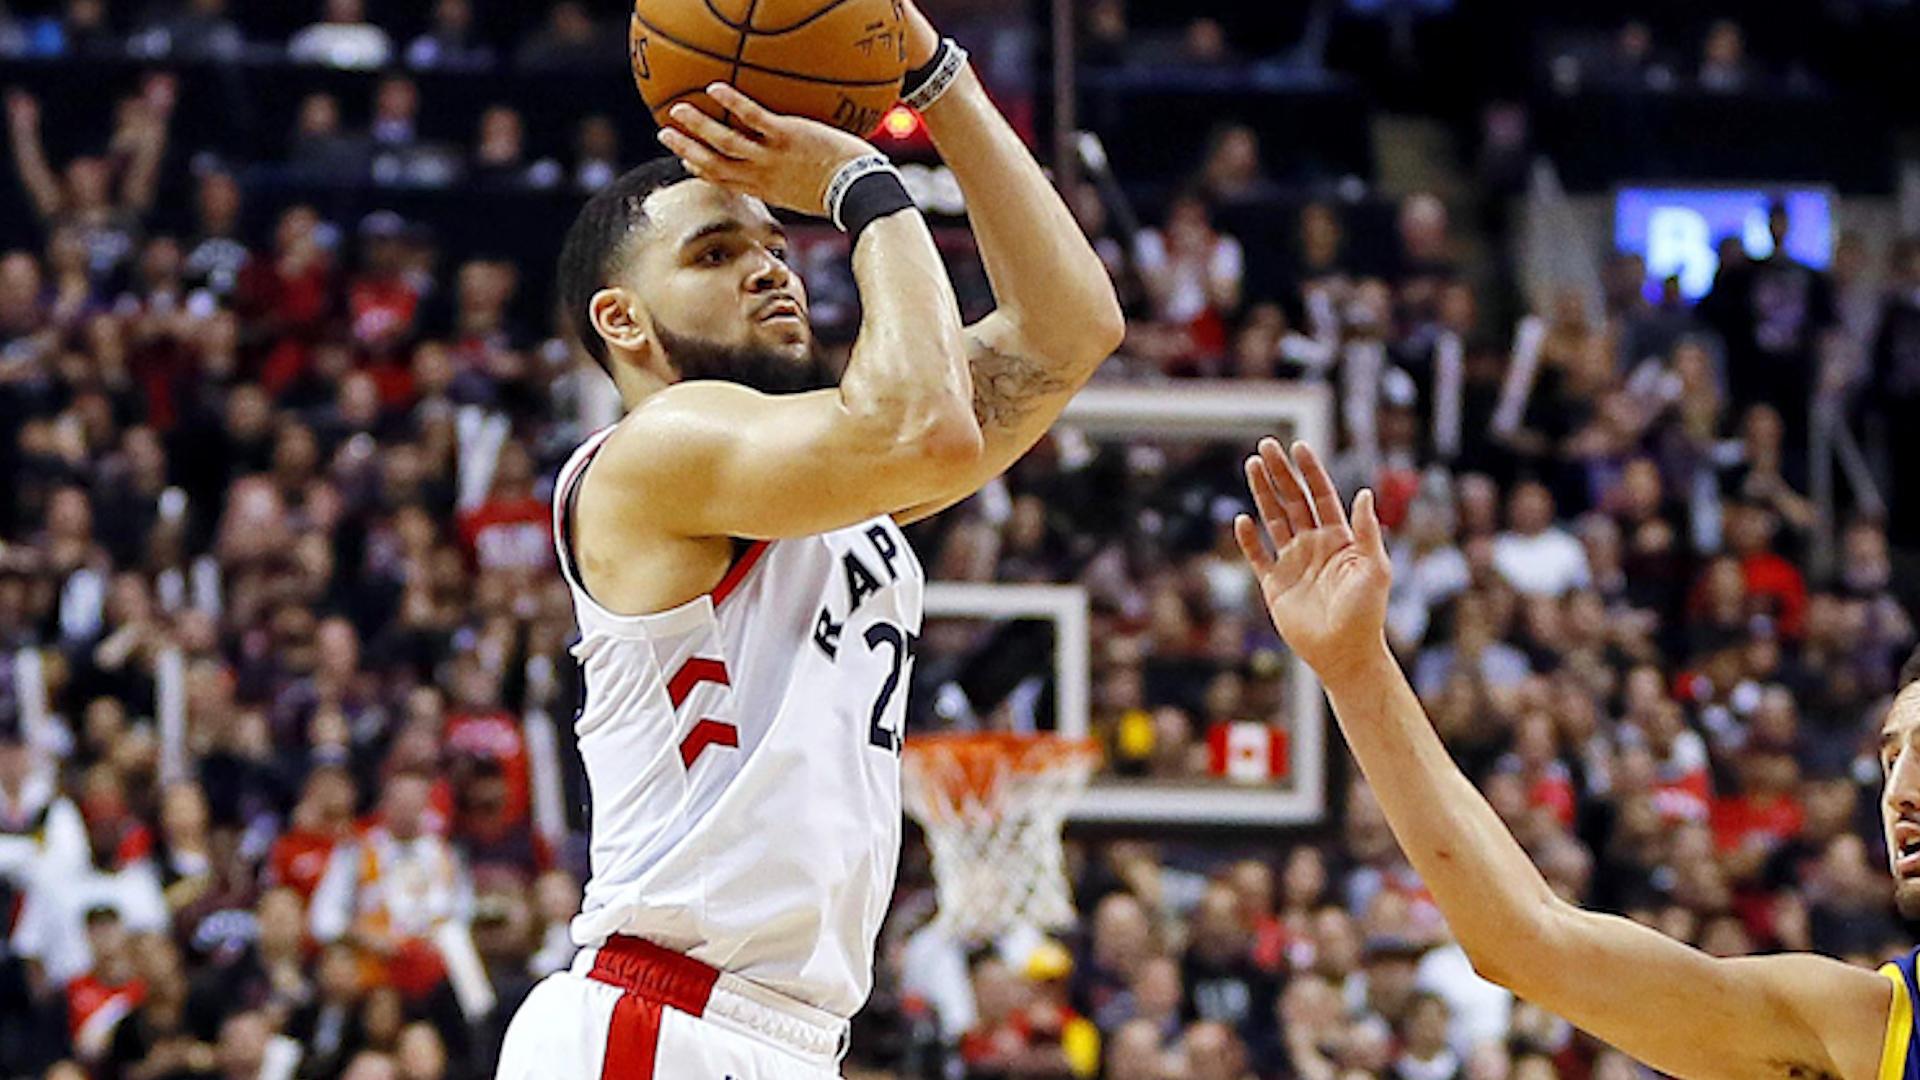 Kanell and Bell: VanVleet and Gasol make major contributions in Game